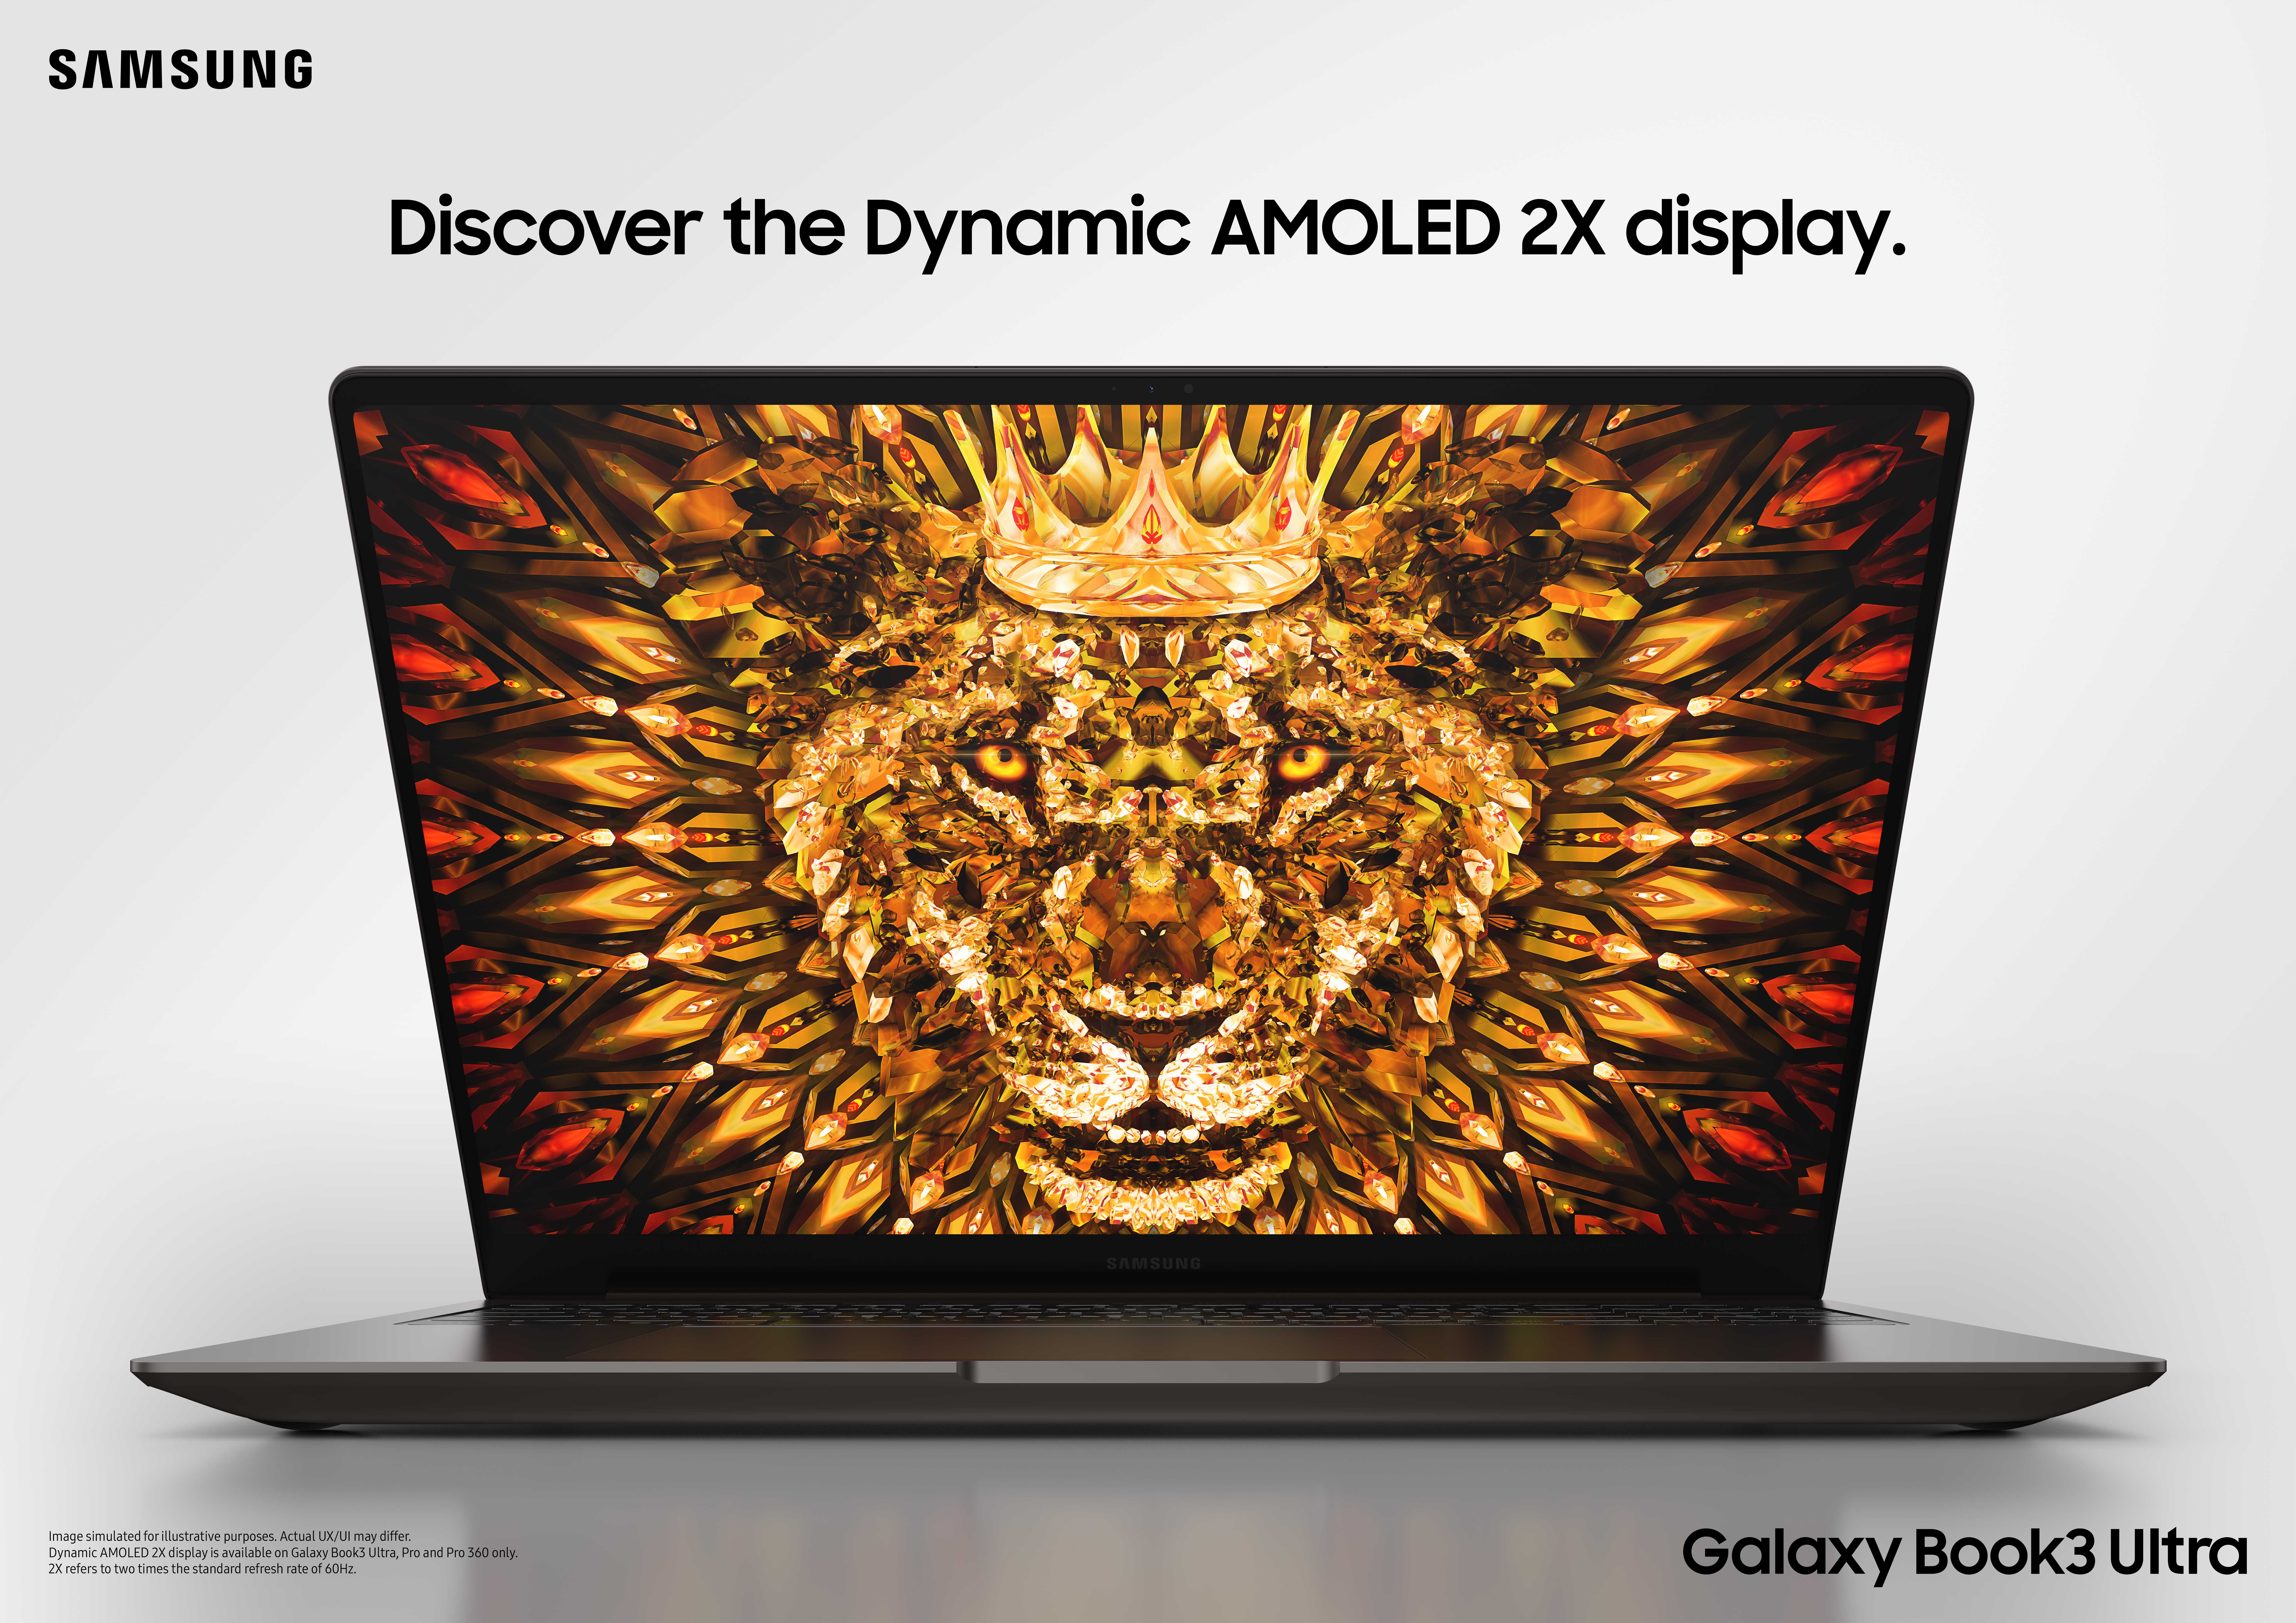 What is a Dynamic AMOLED 2X display? The Samsung feature explained